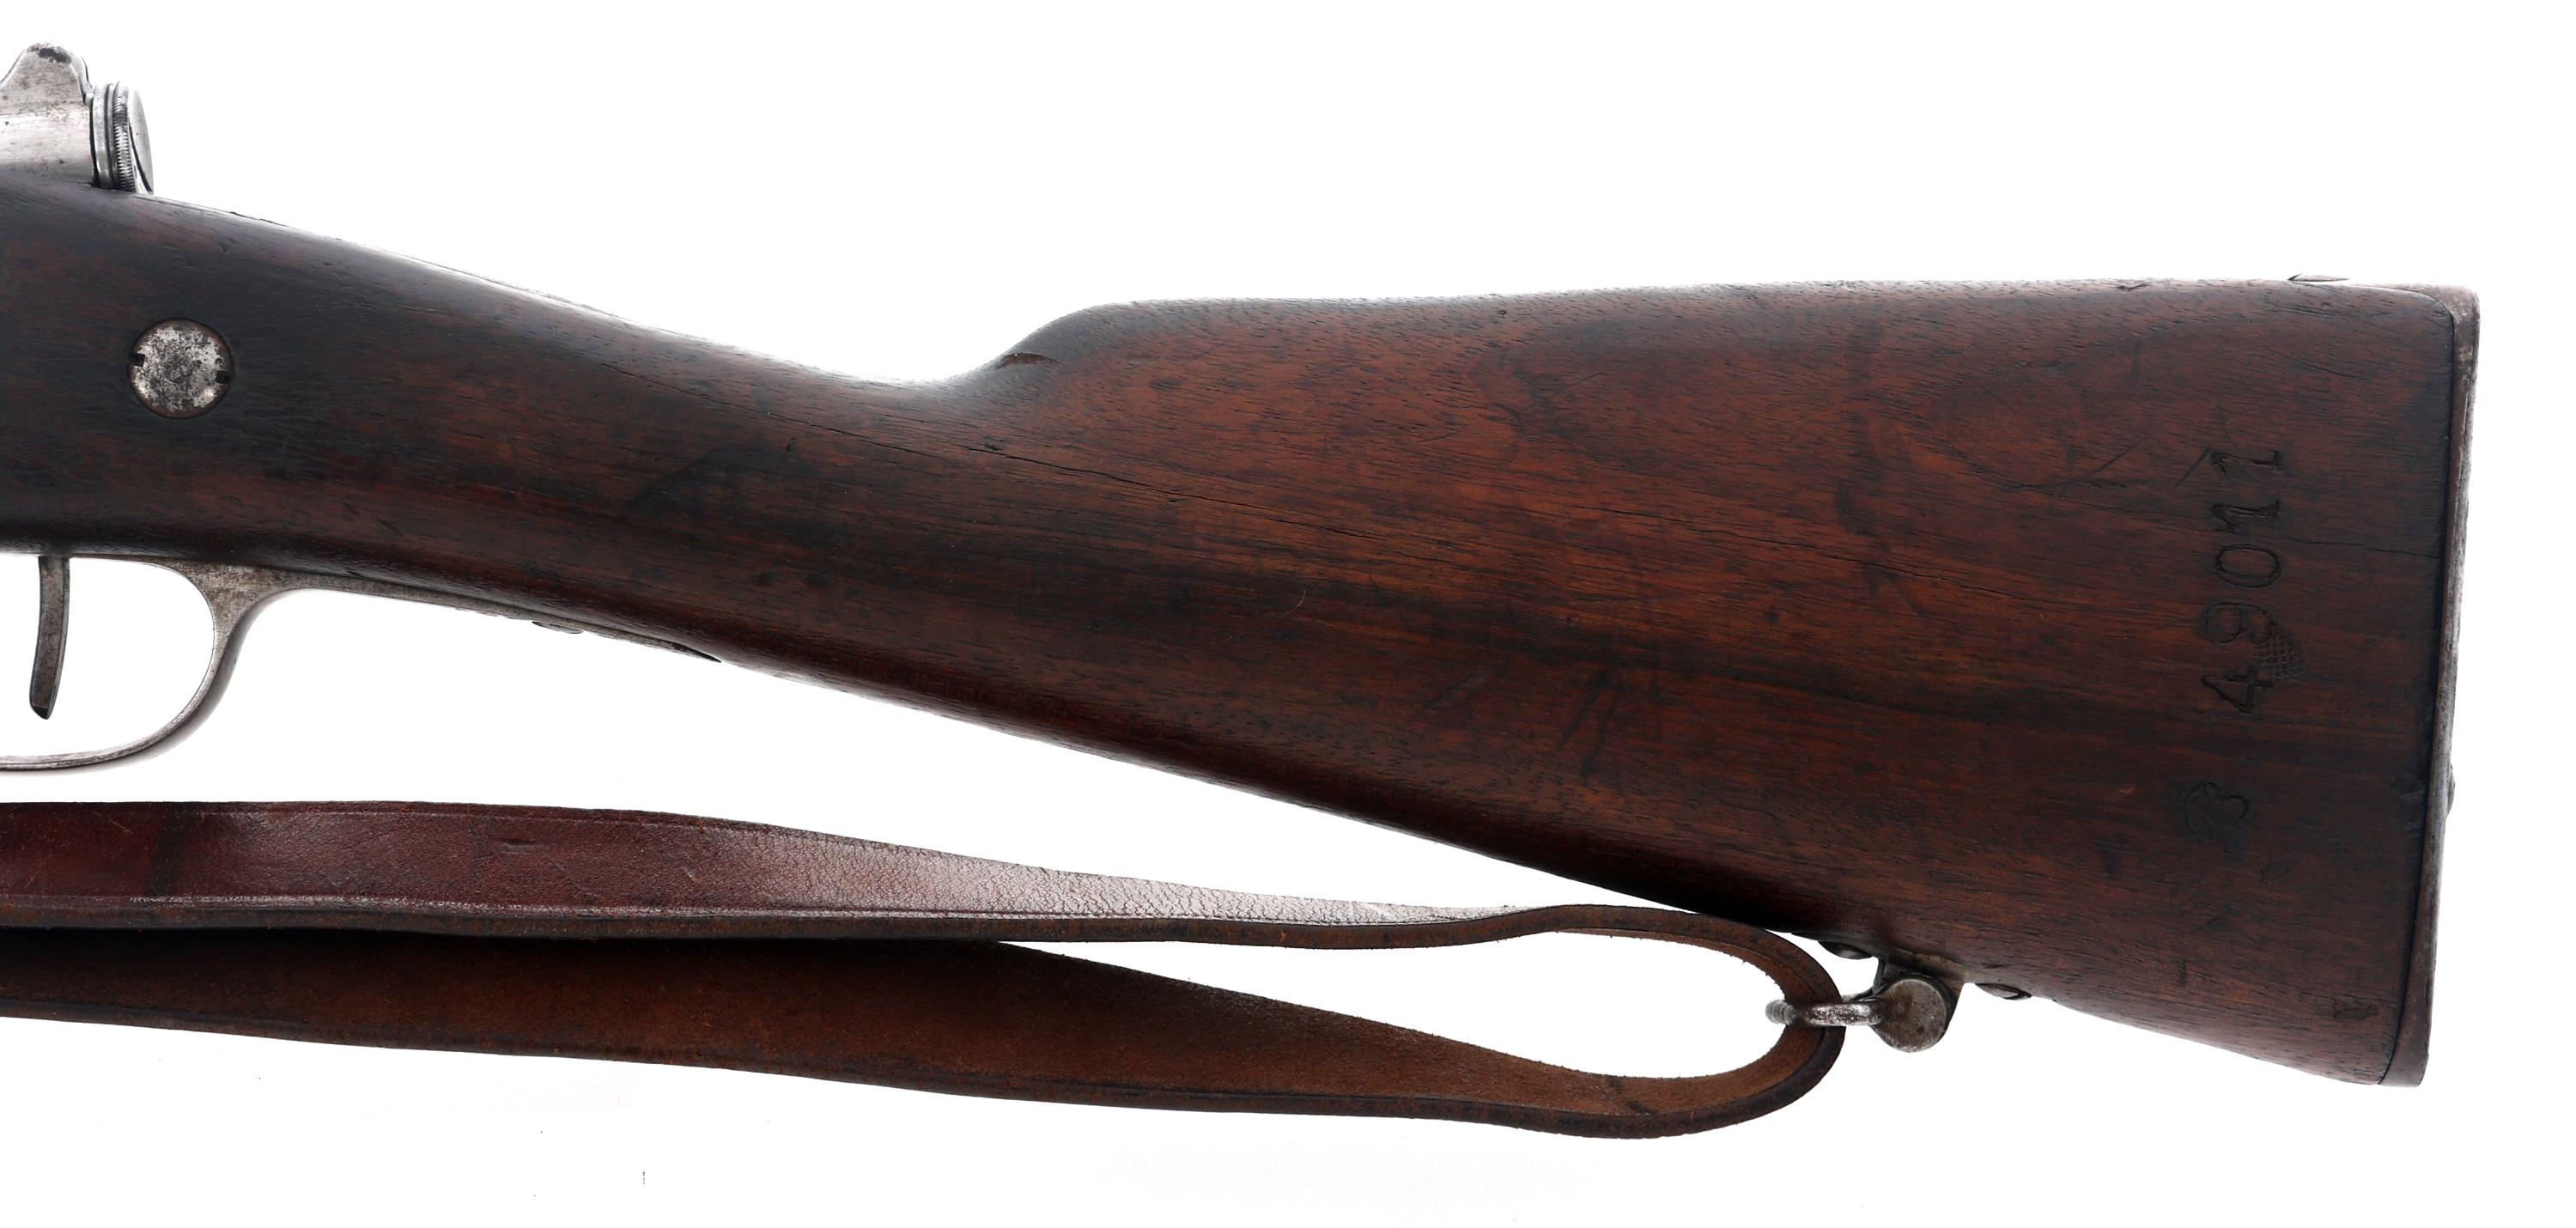 FRENCH TULLE MODEL 1886 M93 8x50mm CAL RIFLE